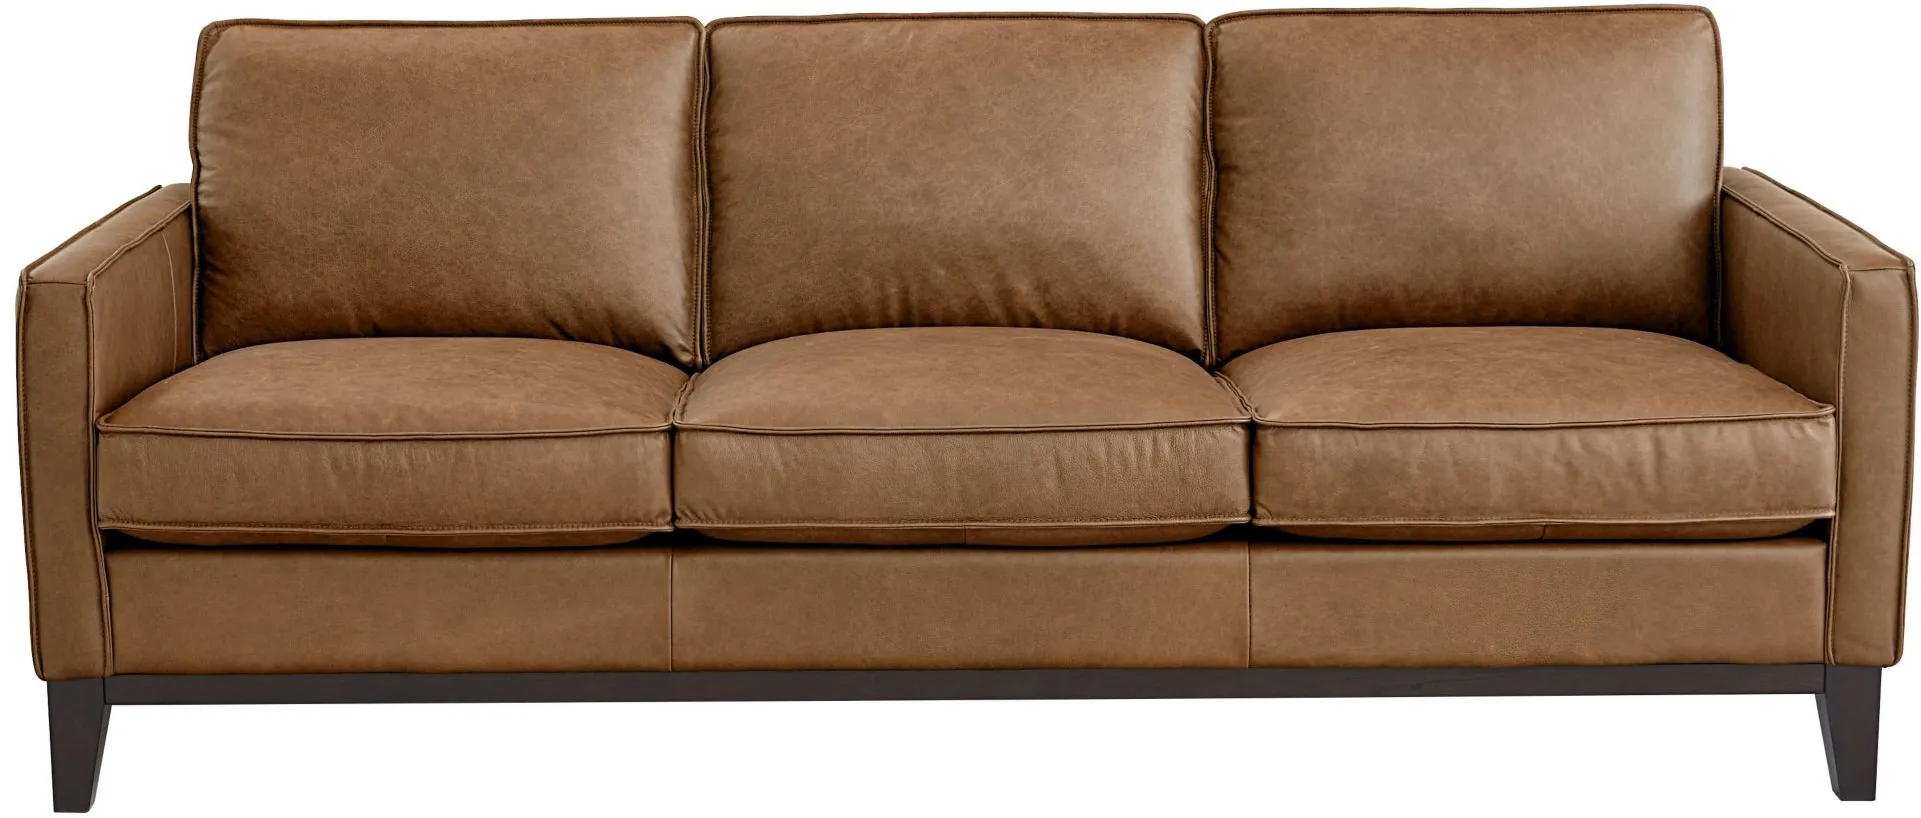 gtr leather inc monza leather sofa in chestnut